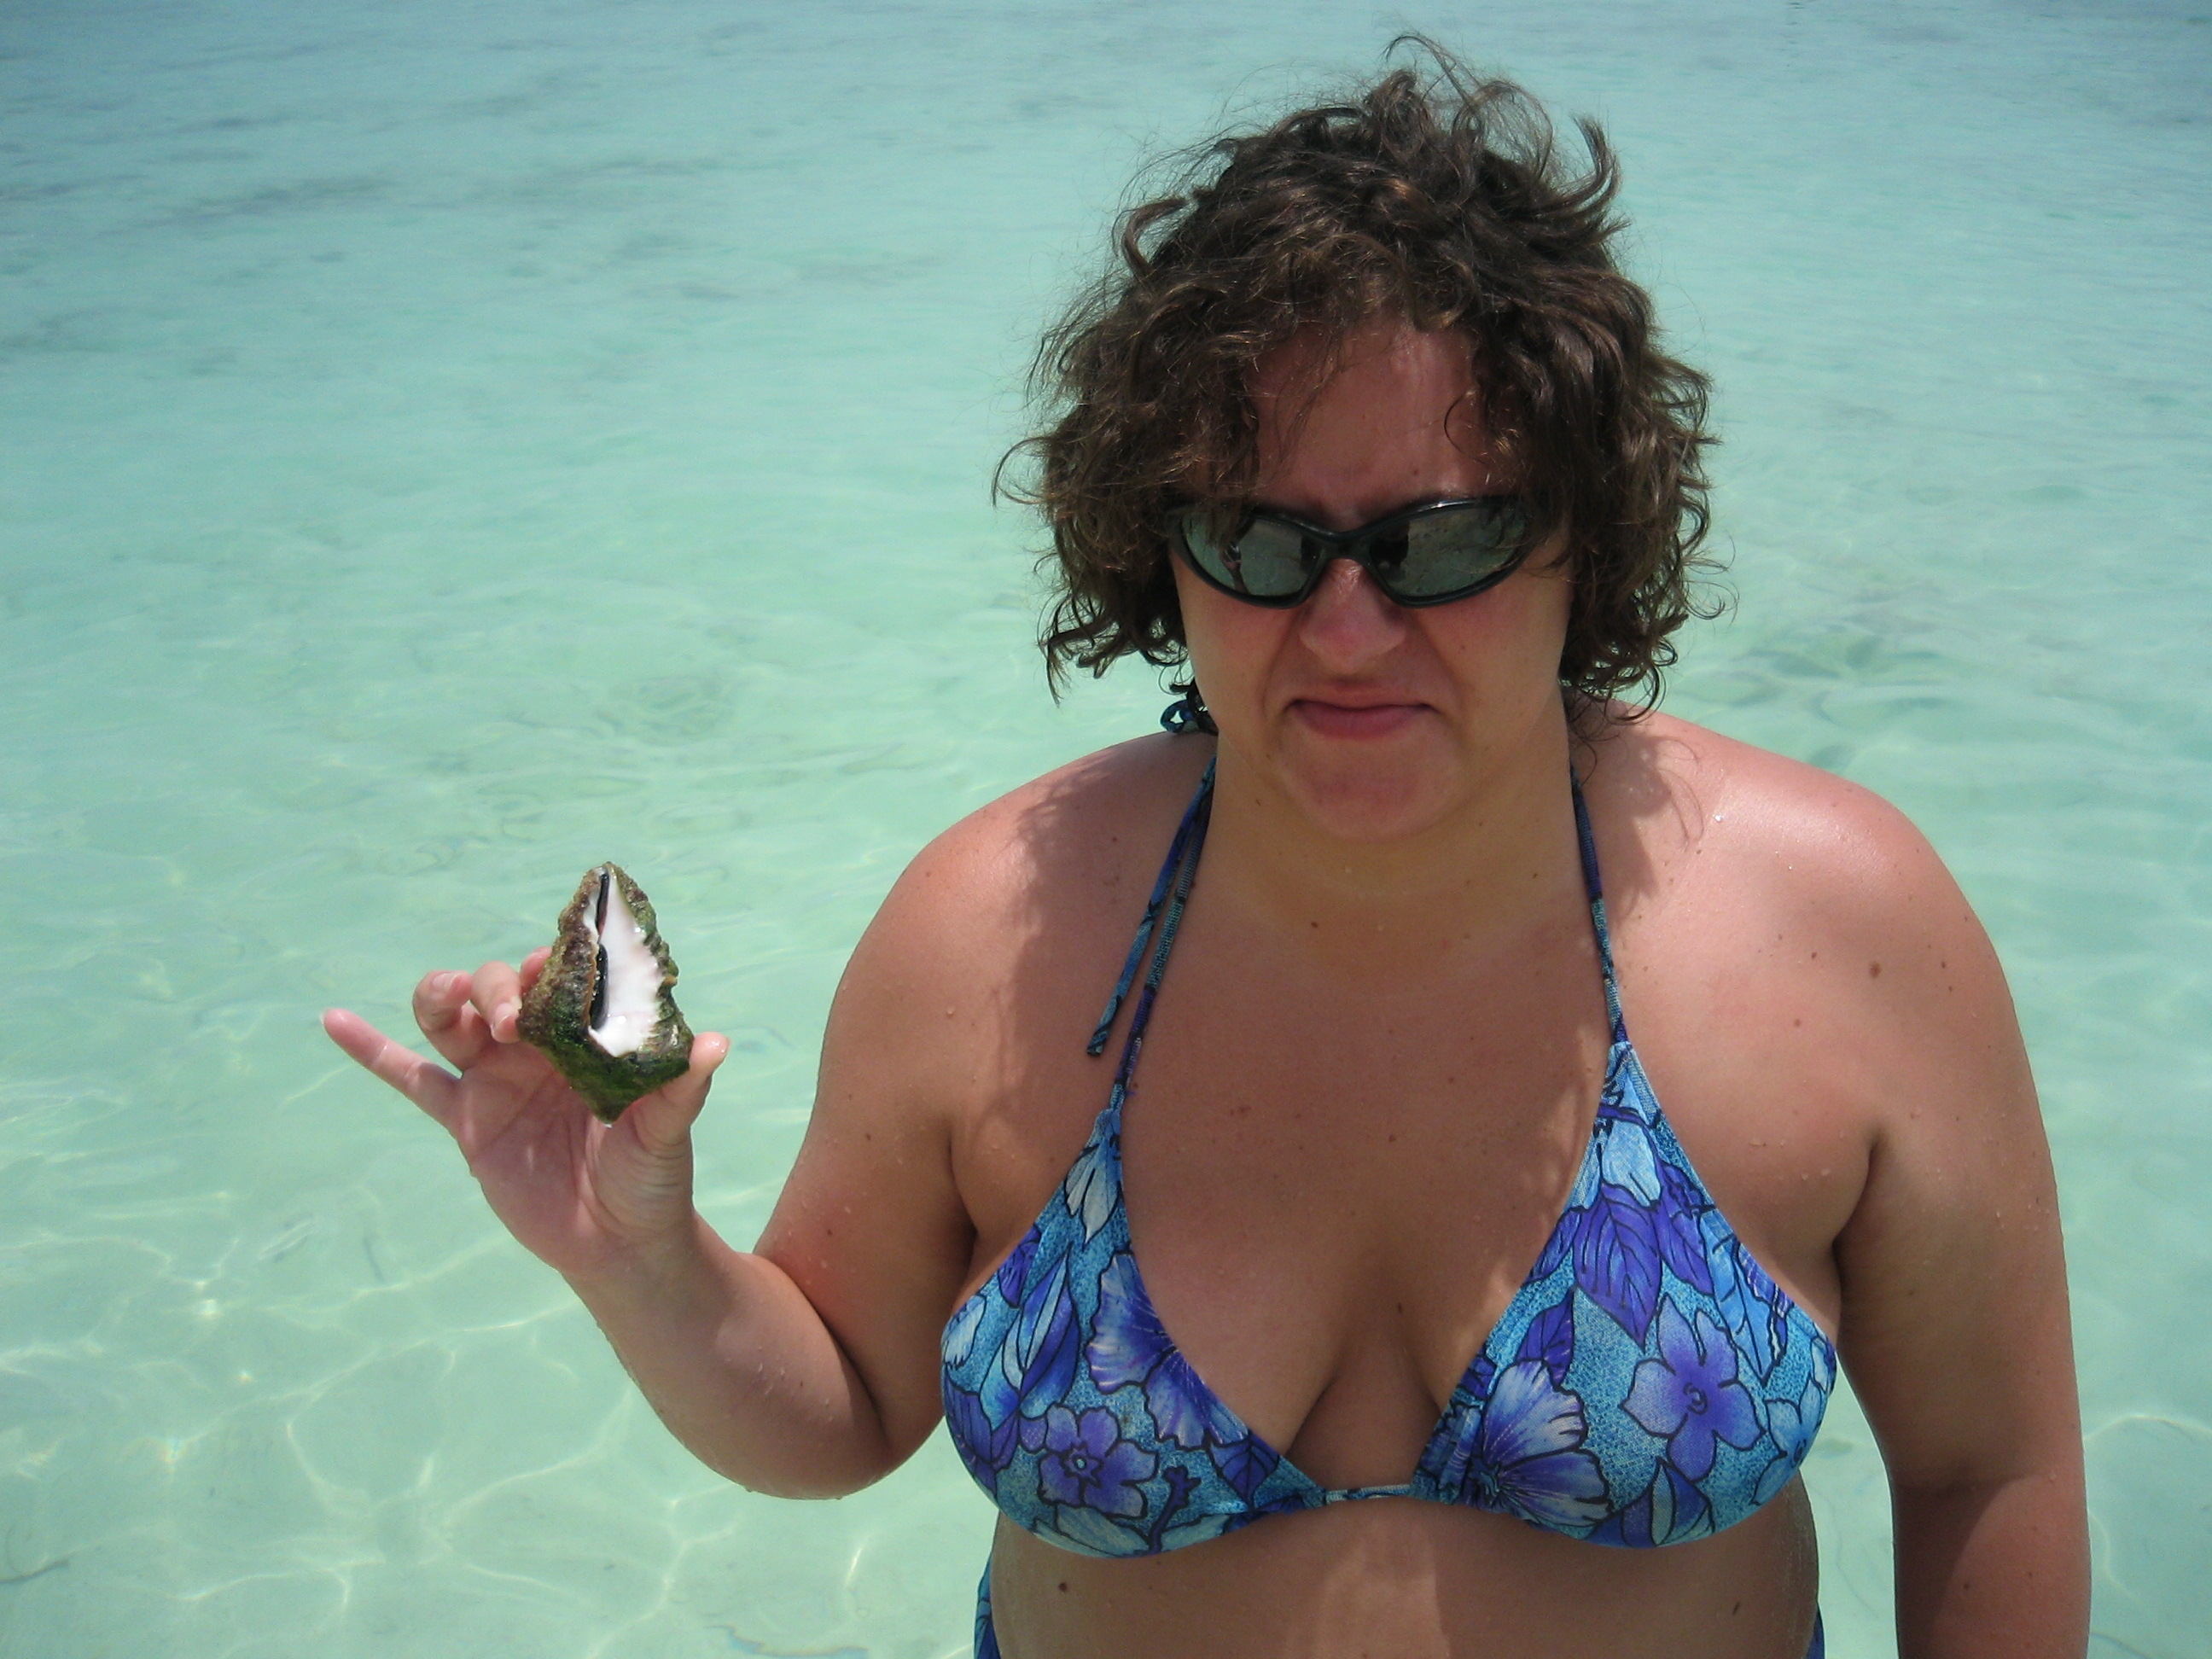 Katie showing her joy at holding the conch at Saona